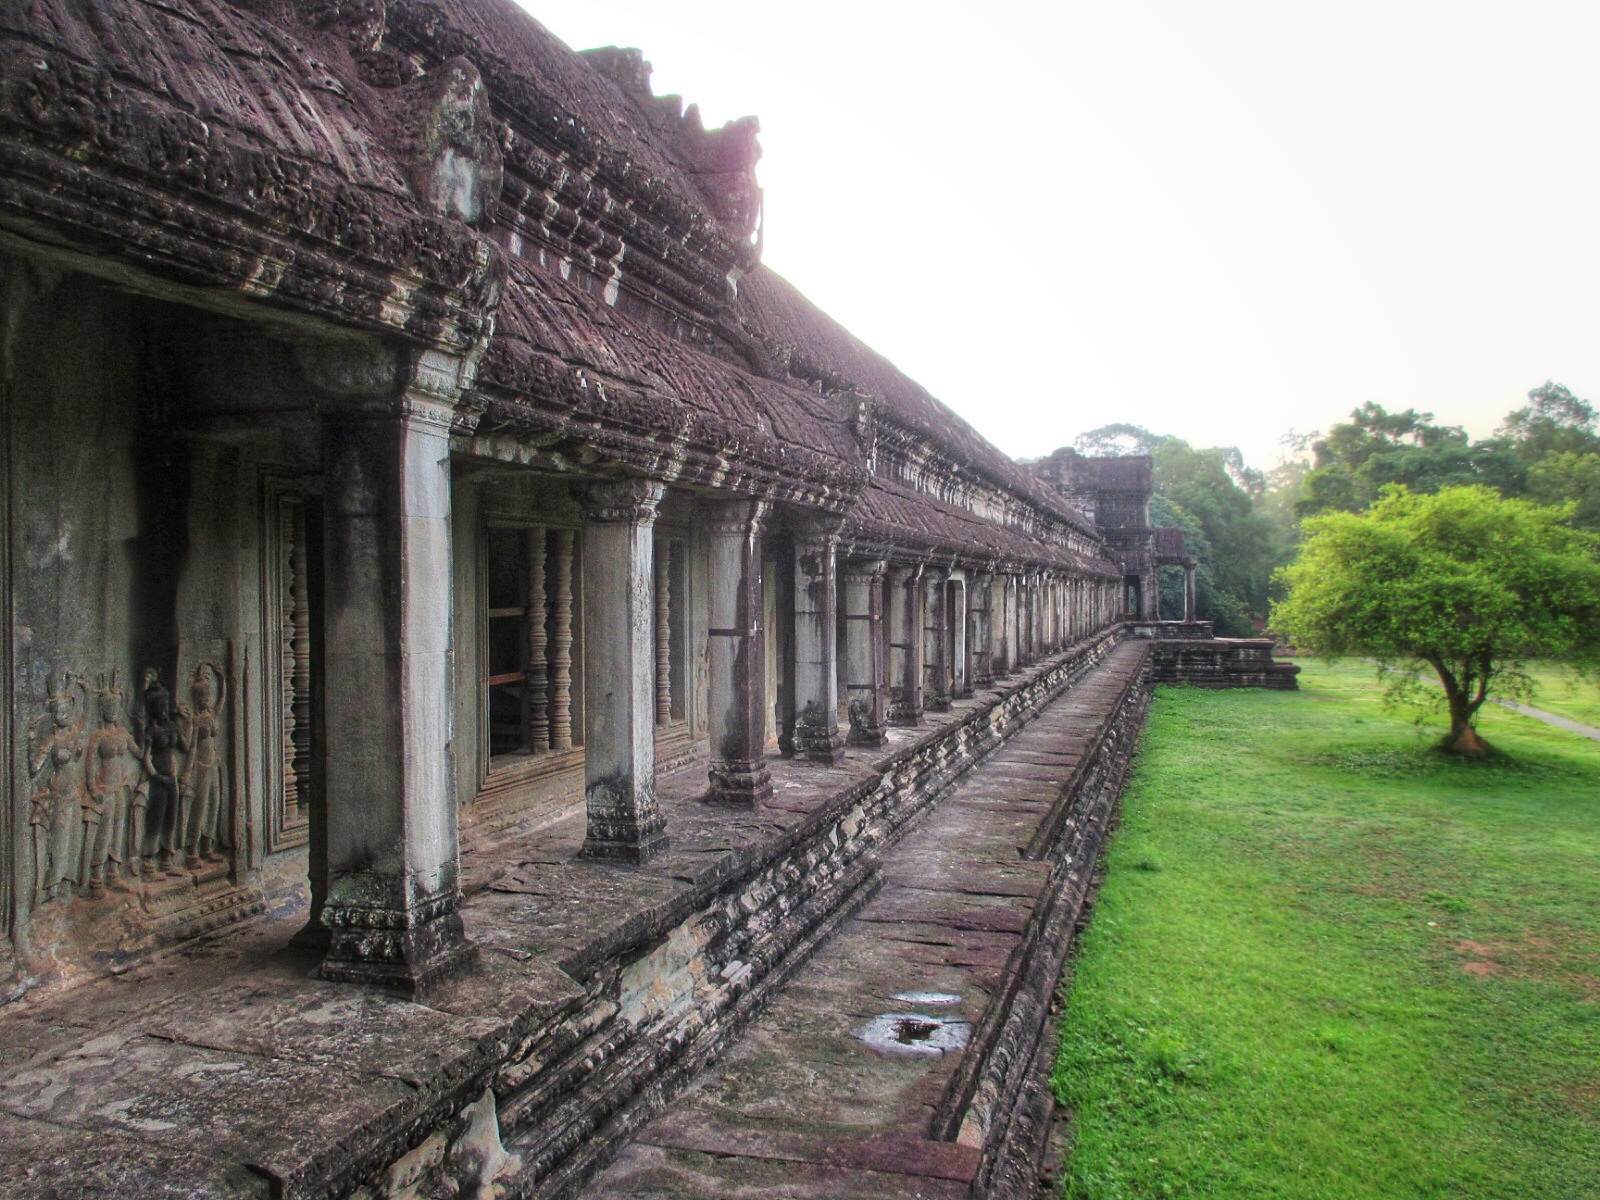 Bas-releif in the outer gallery of Angkor Wat